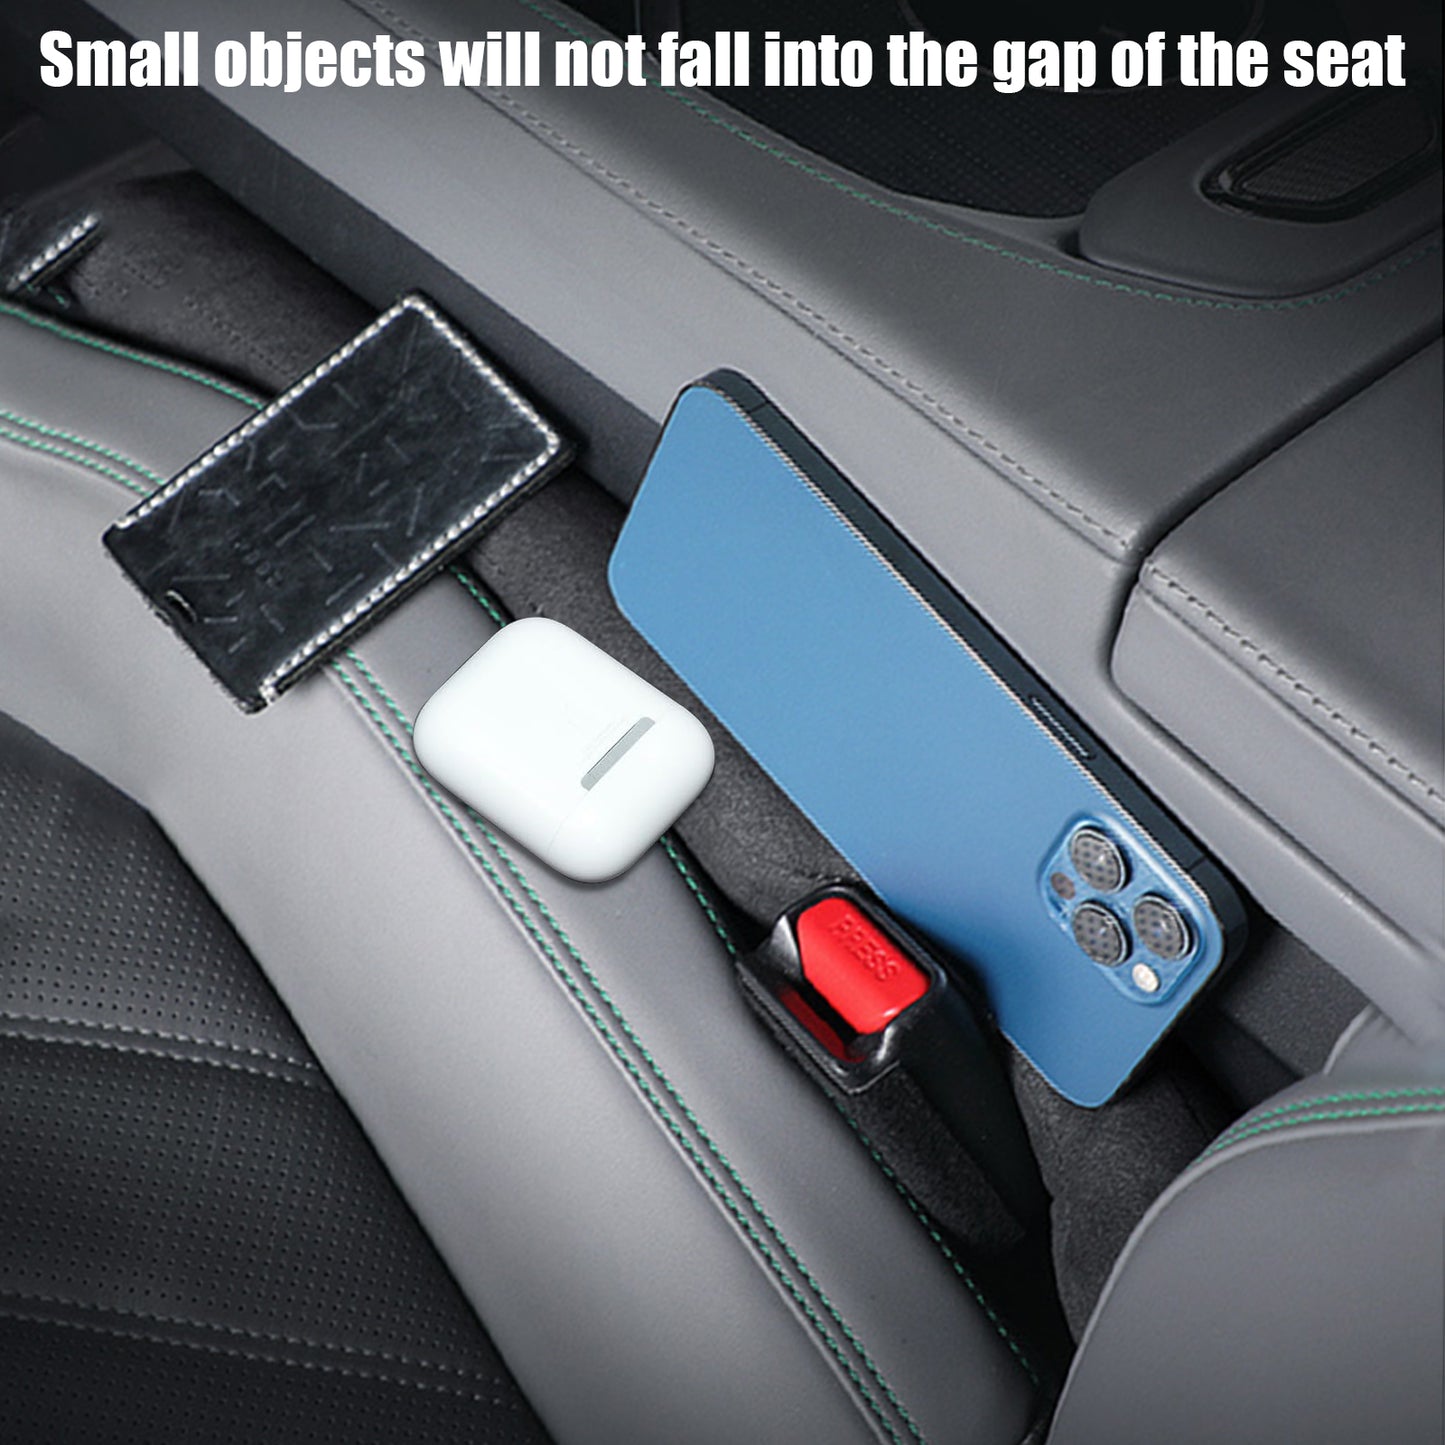 2 pcs Car Seat Gap Fillers - Prevent Items from Falling, Perfect Fit for trucks, cars, and vans, Easy to Clean and Use